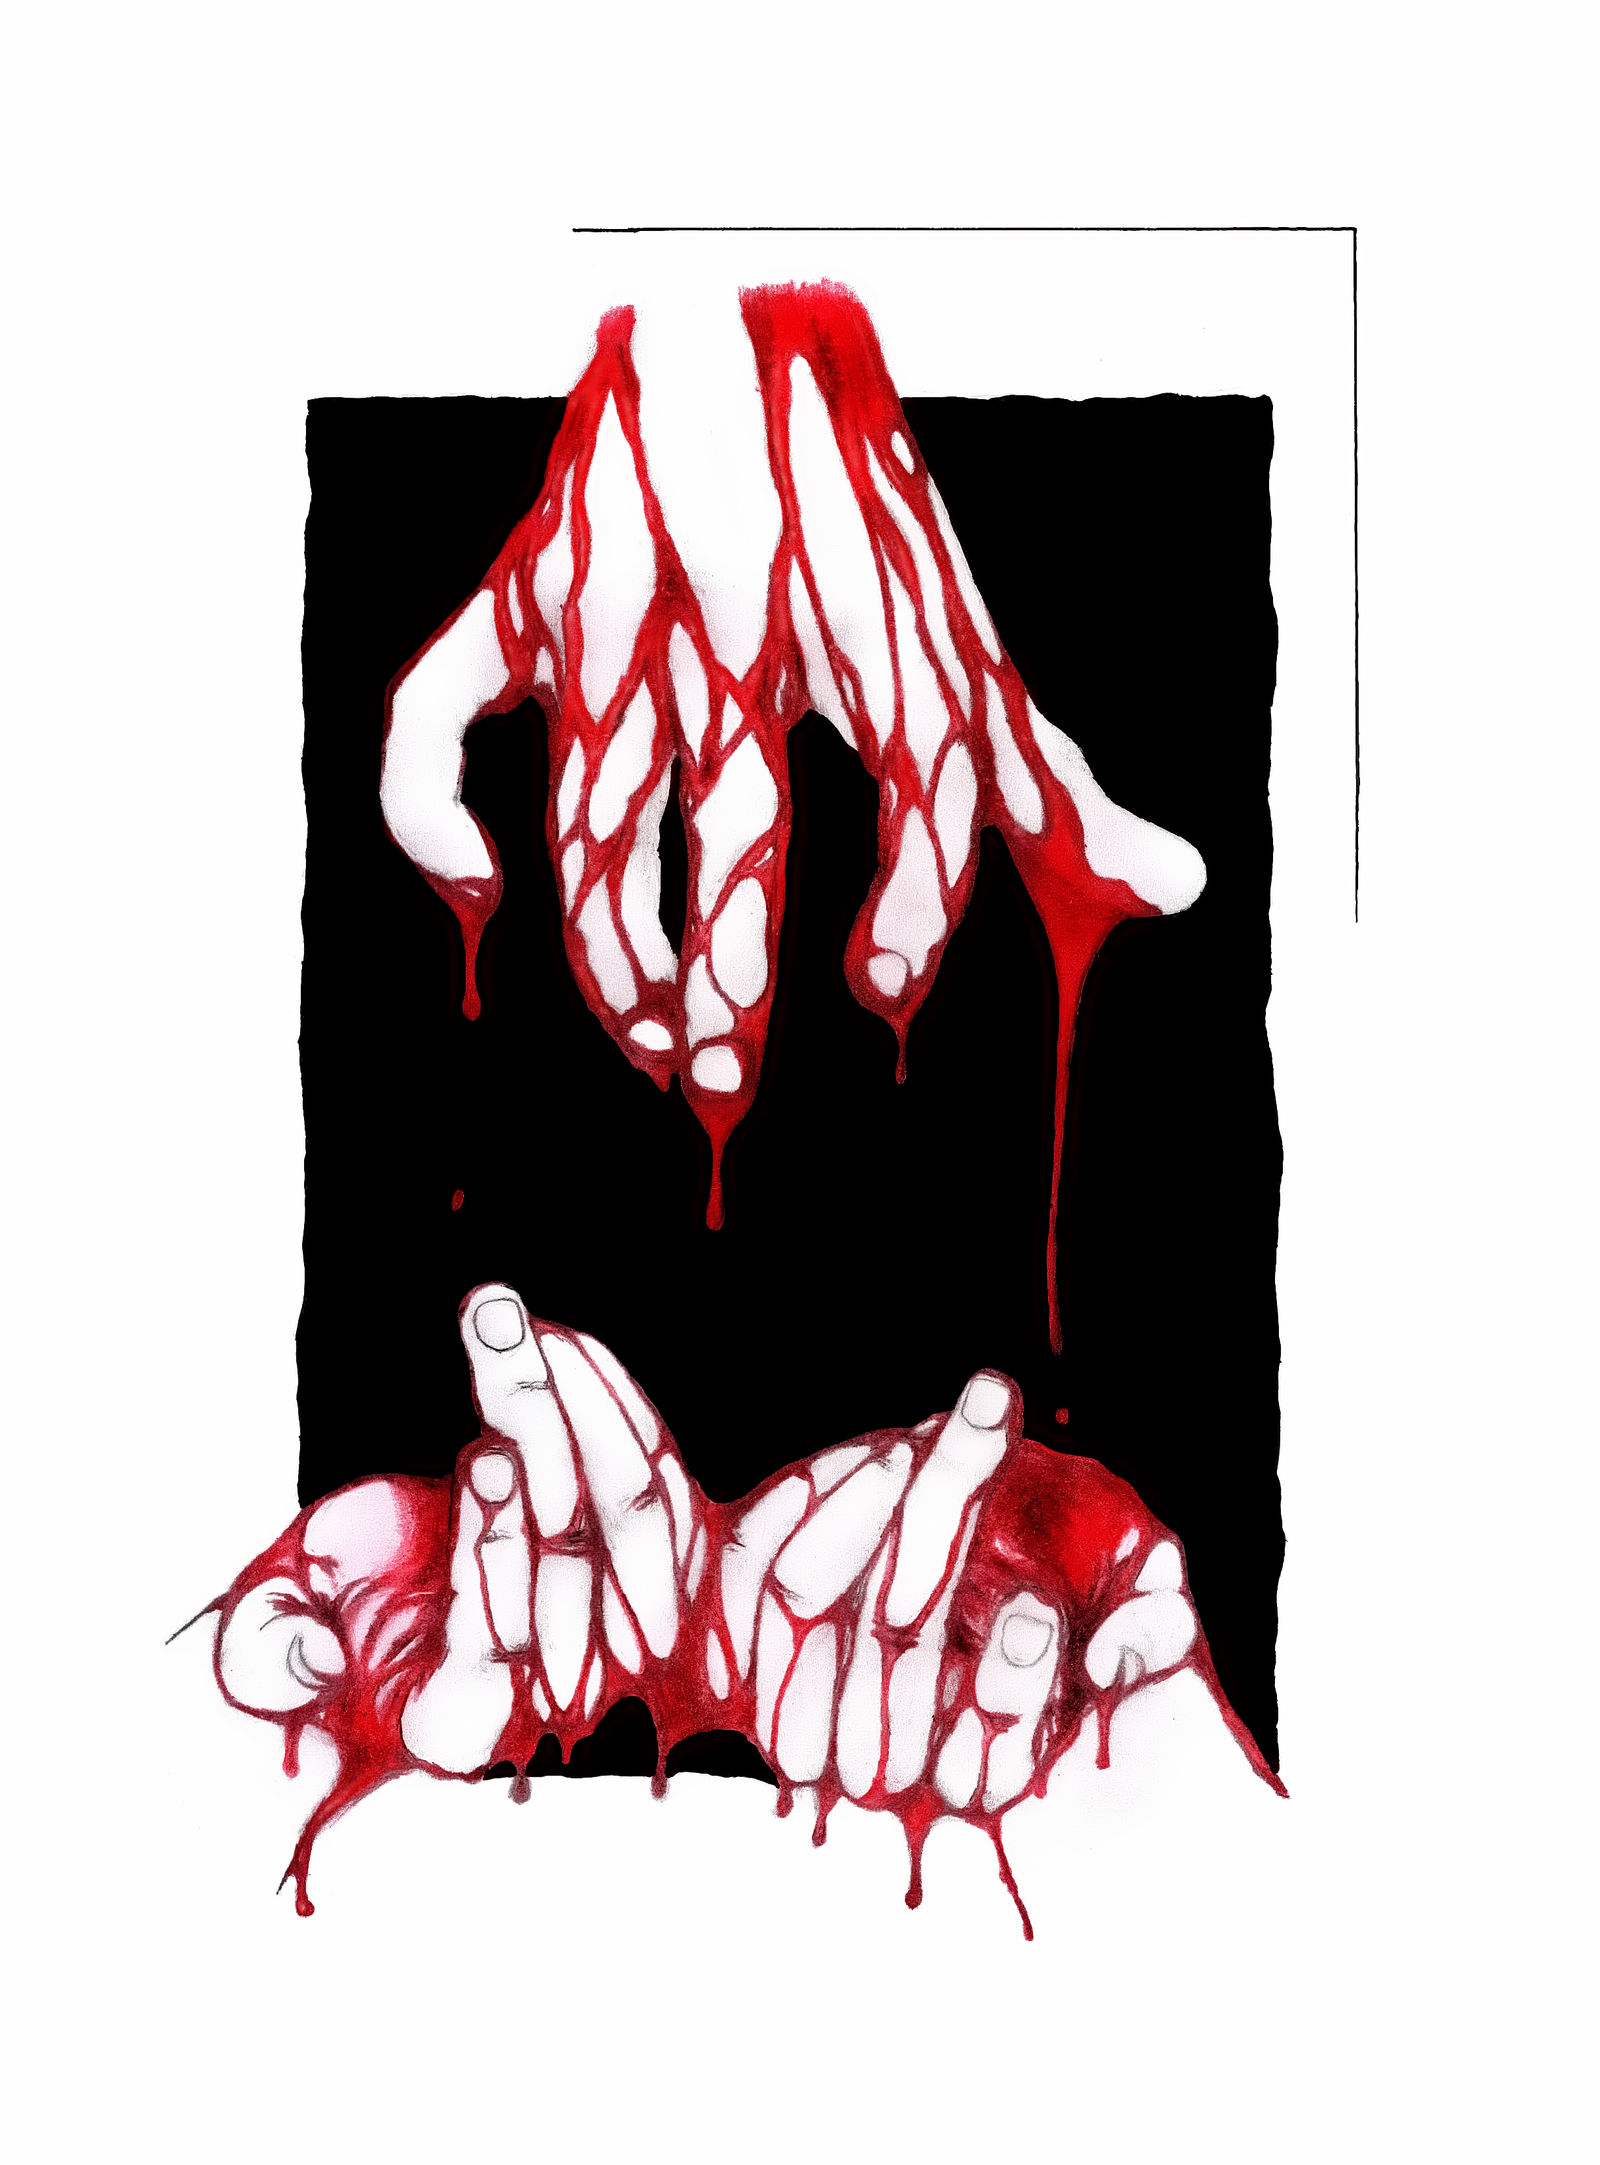 Bloody Hands by 42-42-465 on DeviantArt